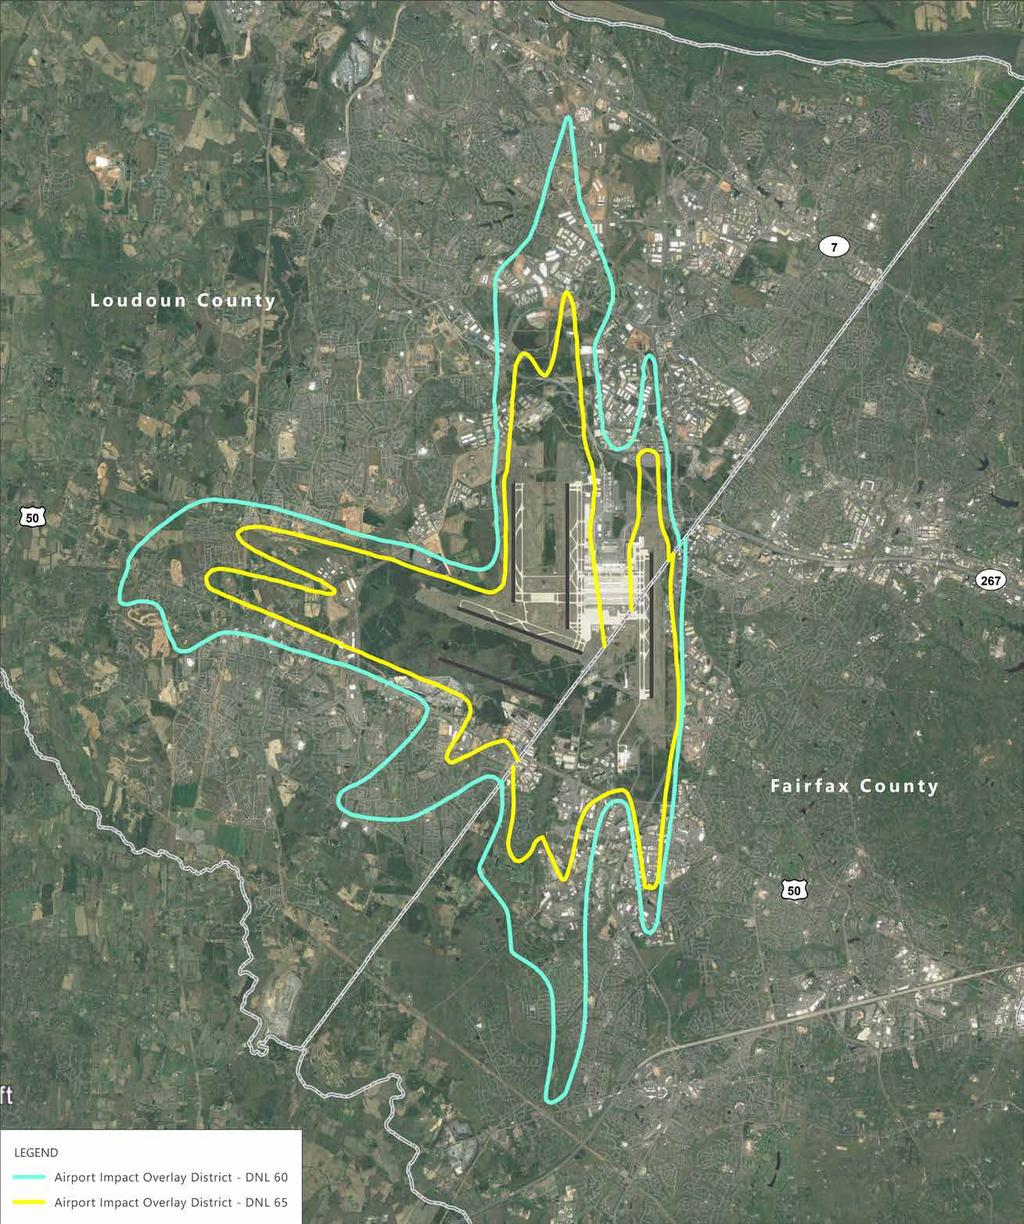 Existing Airport Noise Impact Overlay Districts for Loudoun and Fairfax SO